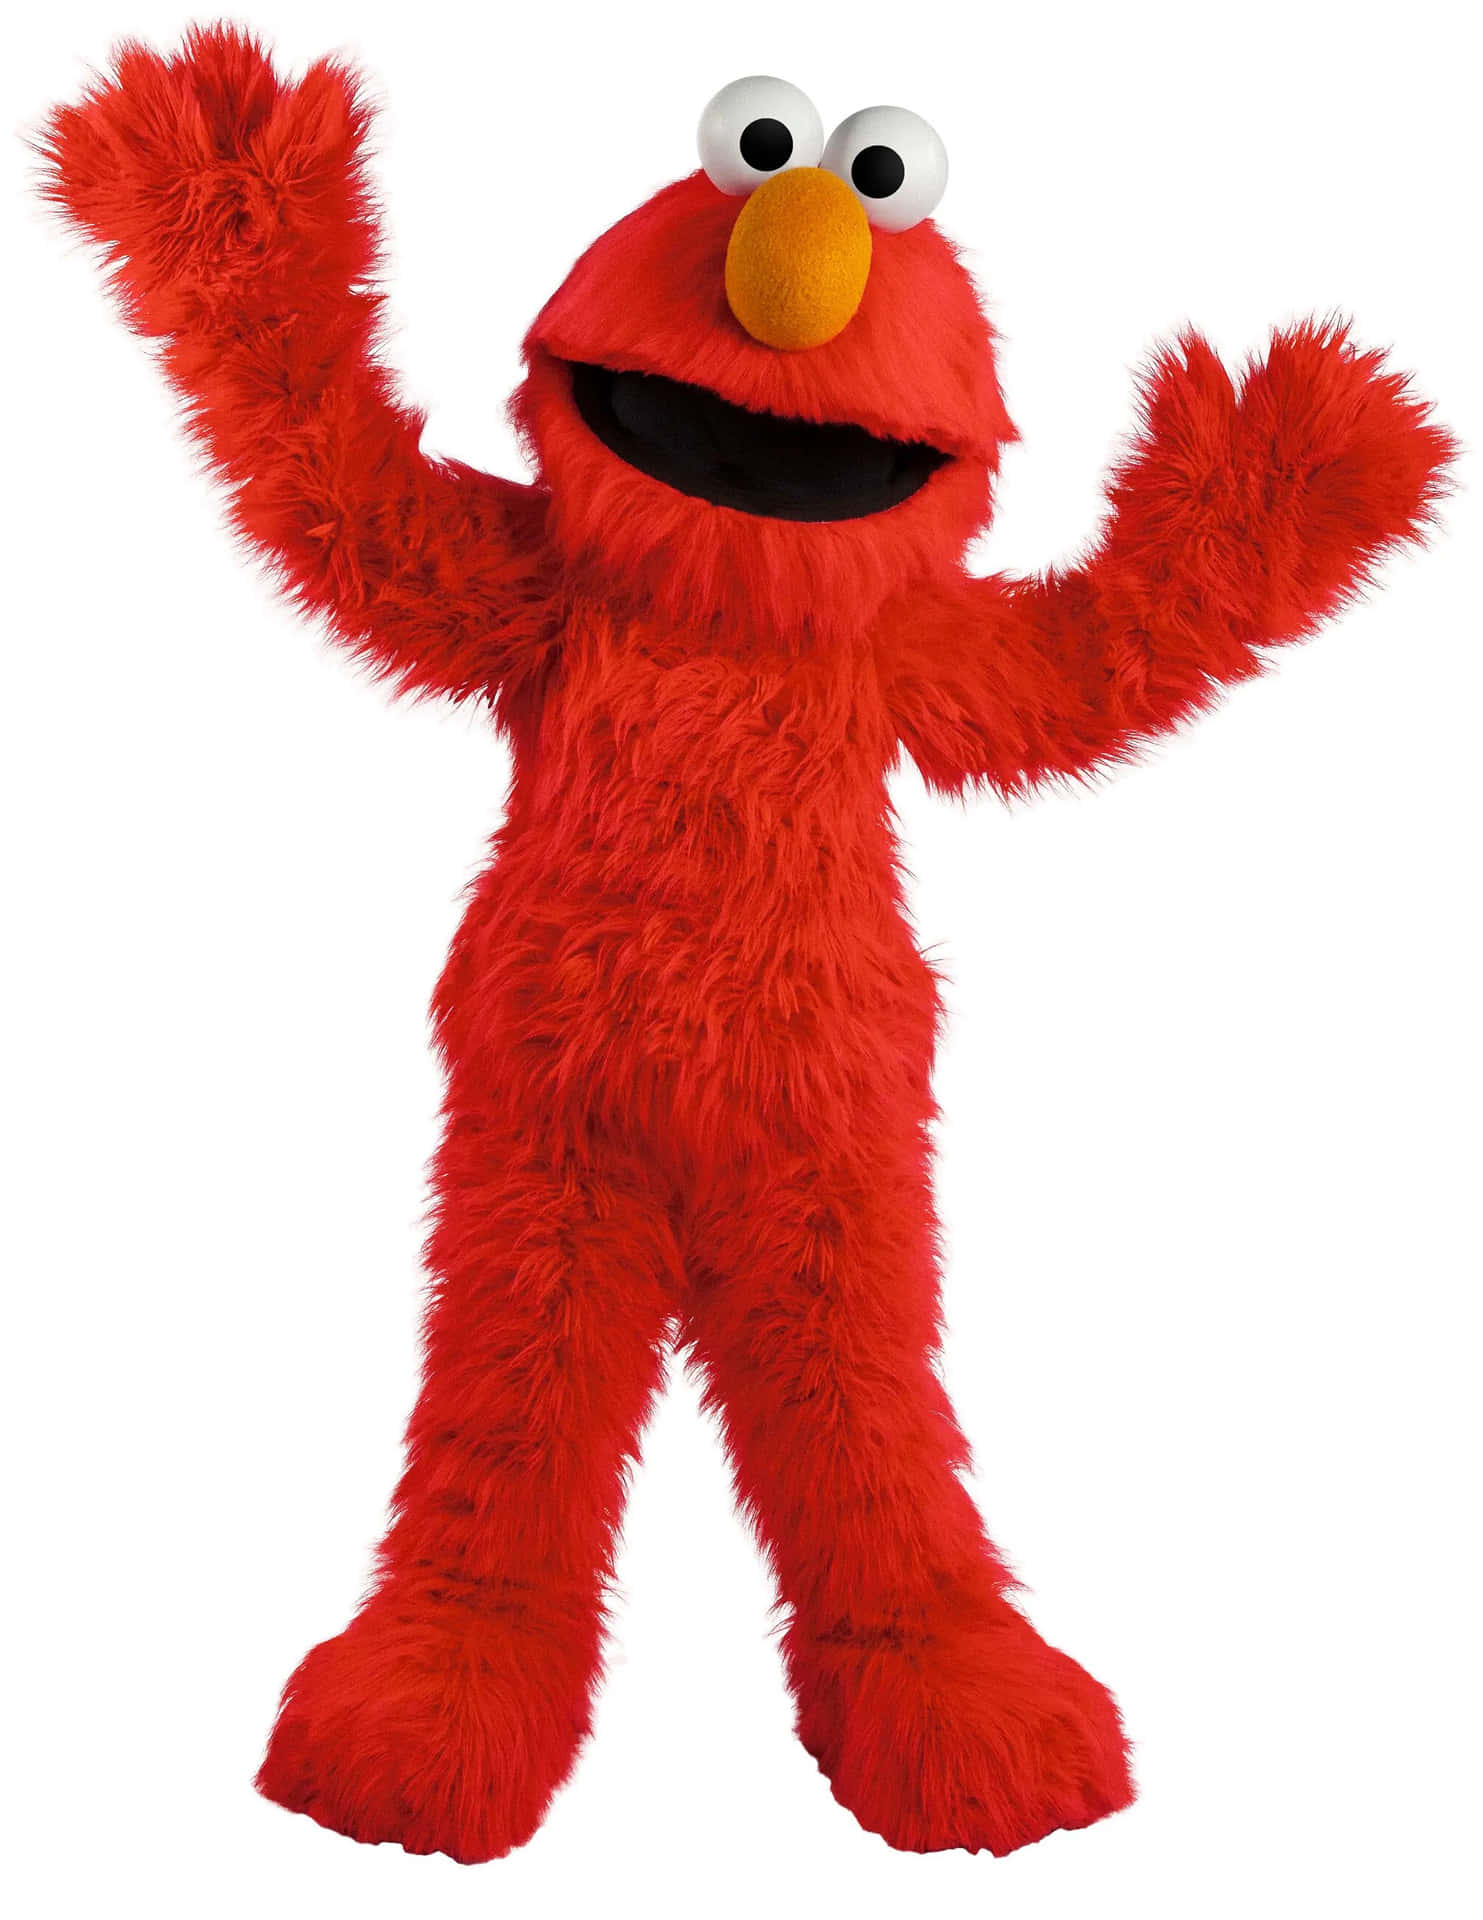 Elmo Smiling on a Colorful Background